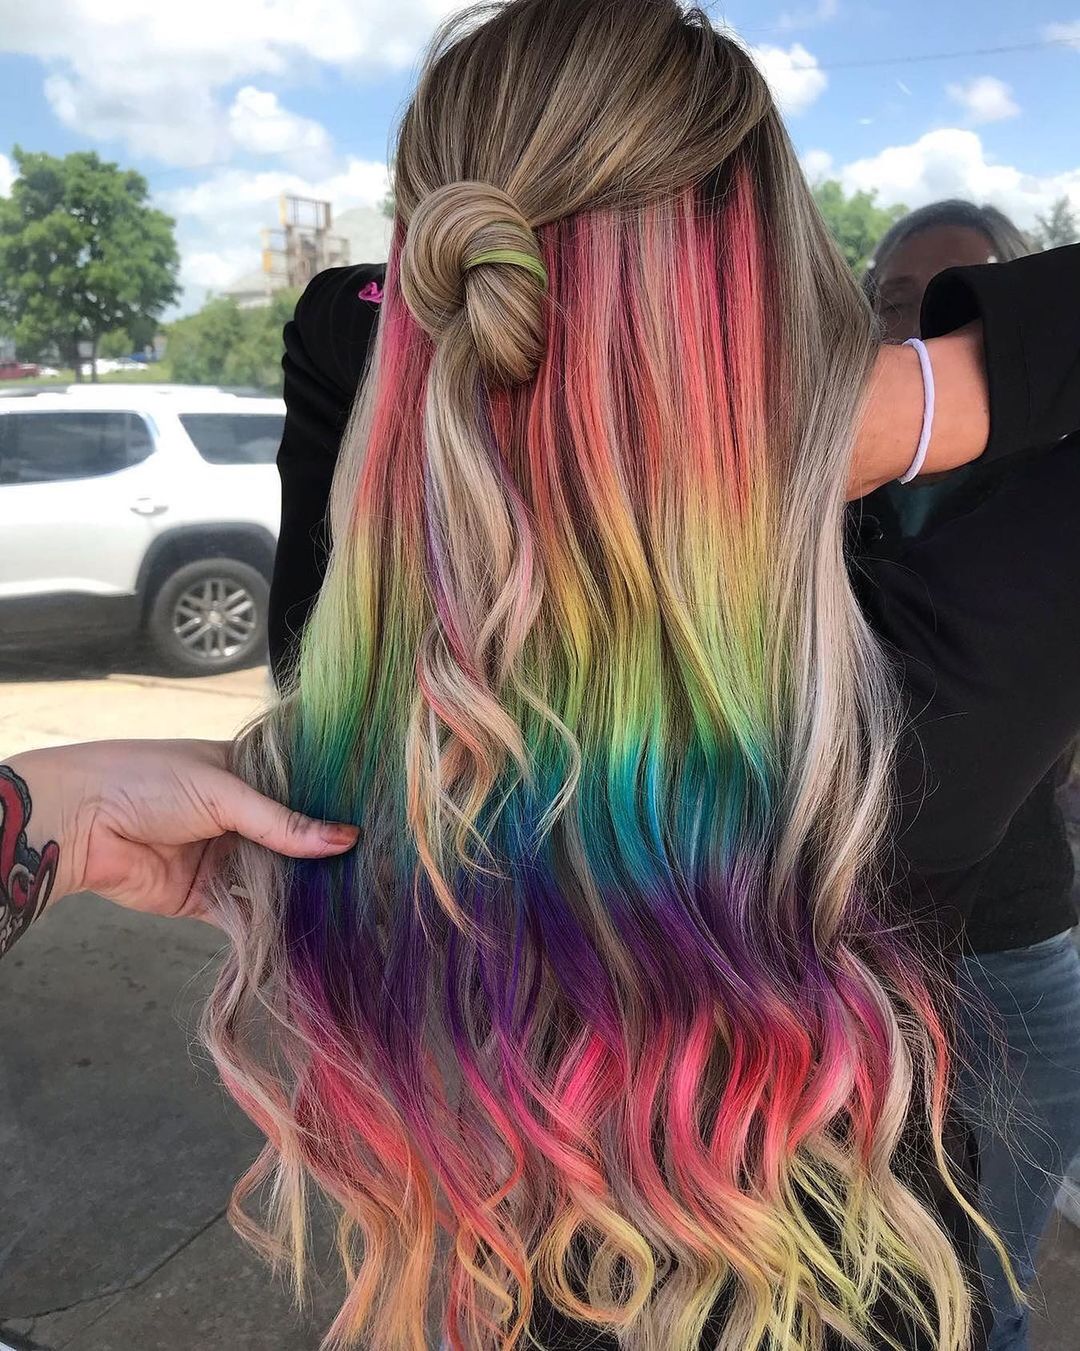 Oil Slick Hair Is a More Subtle Way to Wear the Rainbow Hair Trend